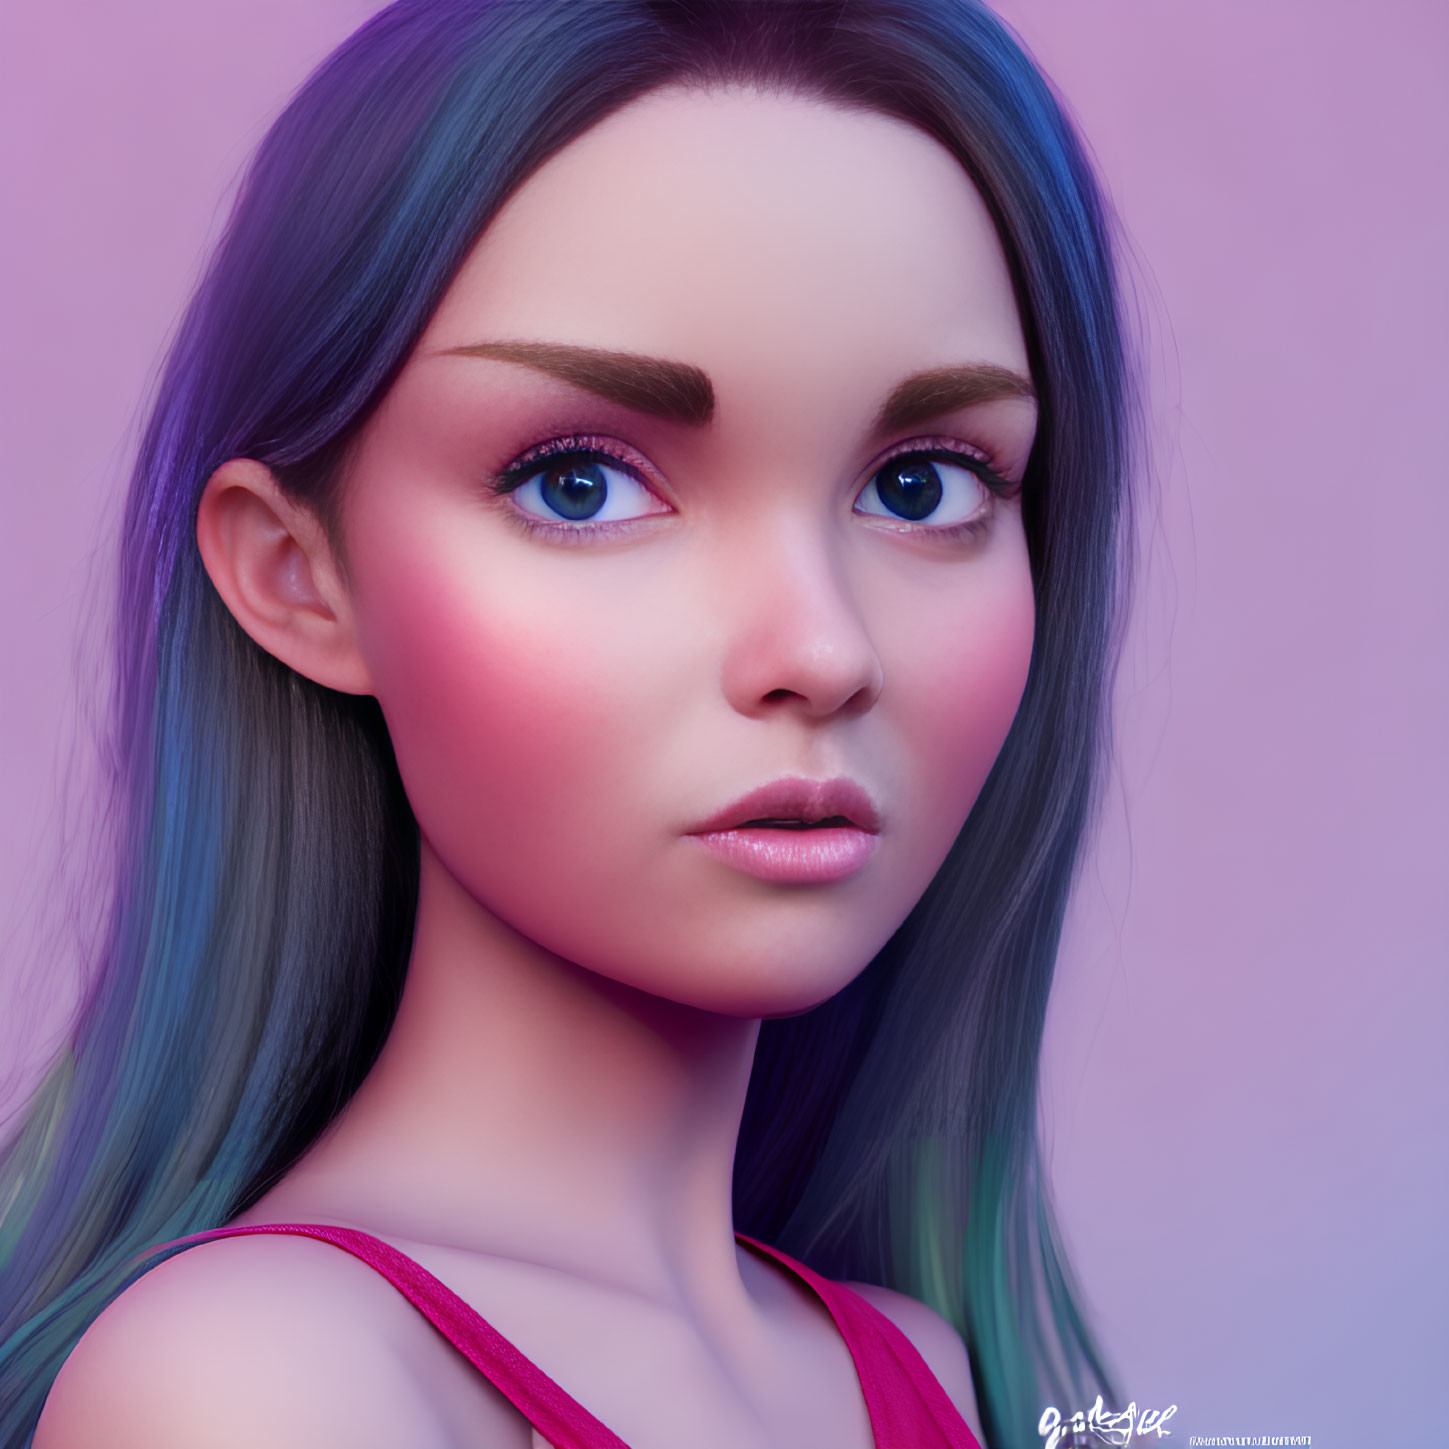 Rendered image: Woman with blue eyes, purple hair, pink top on purple background